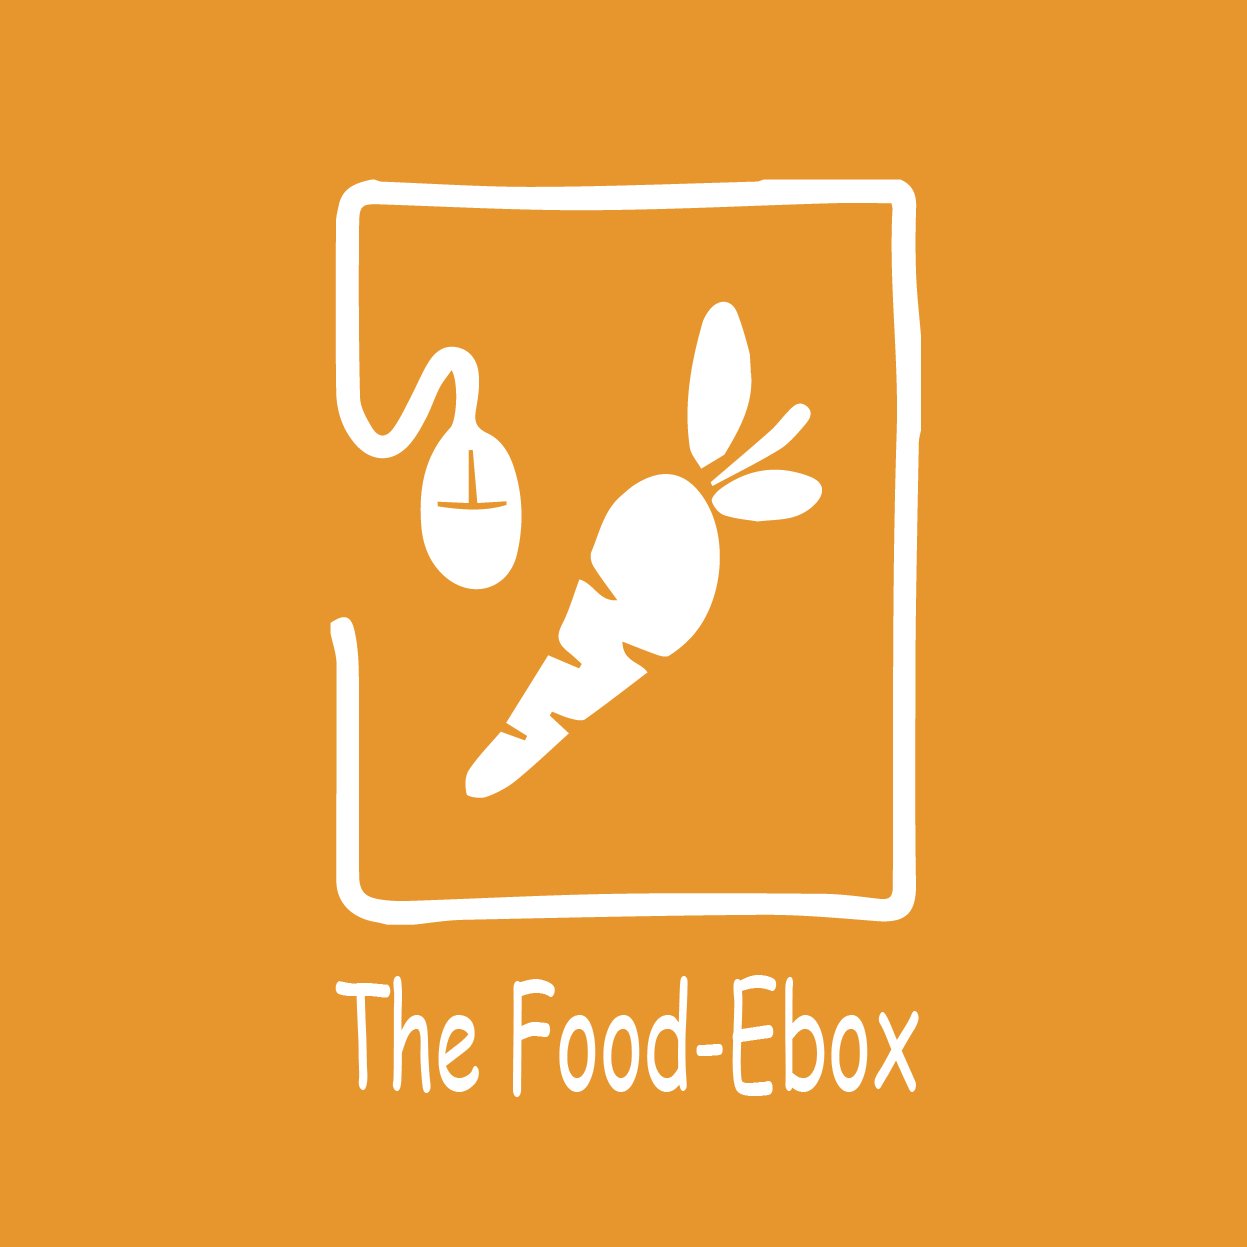 Food delivery company based in Verwood, delivering fresh veg, fruit & meat boxes to suit all family sizes.